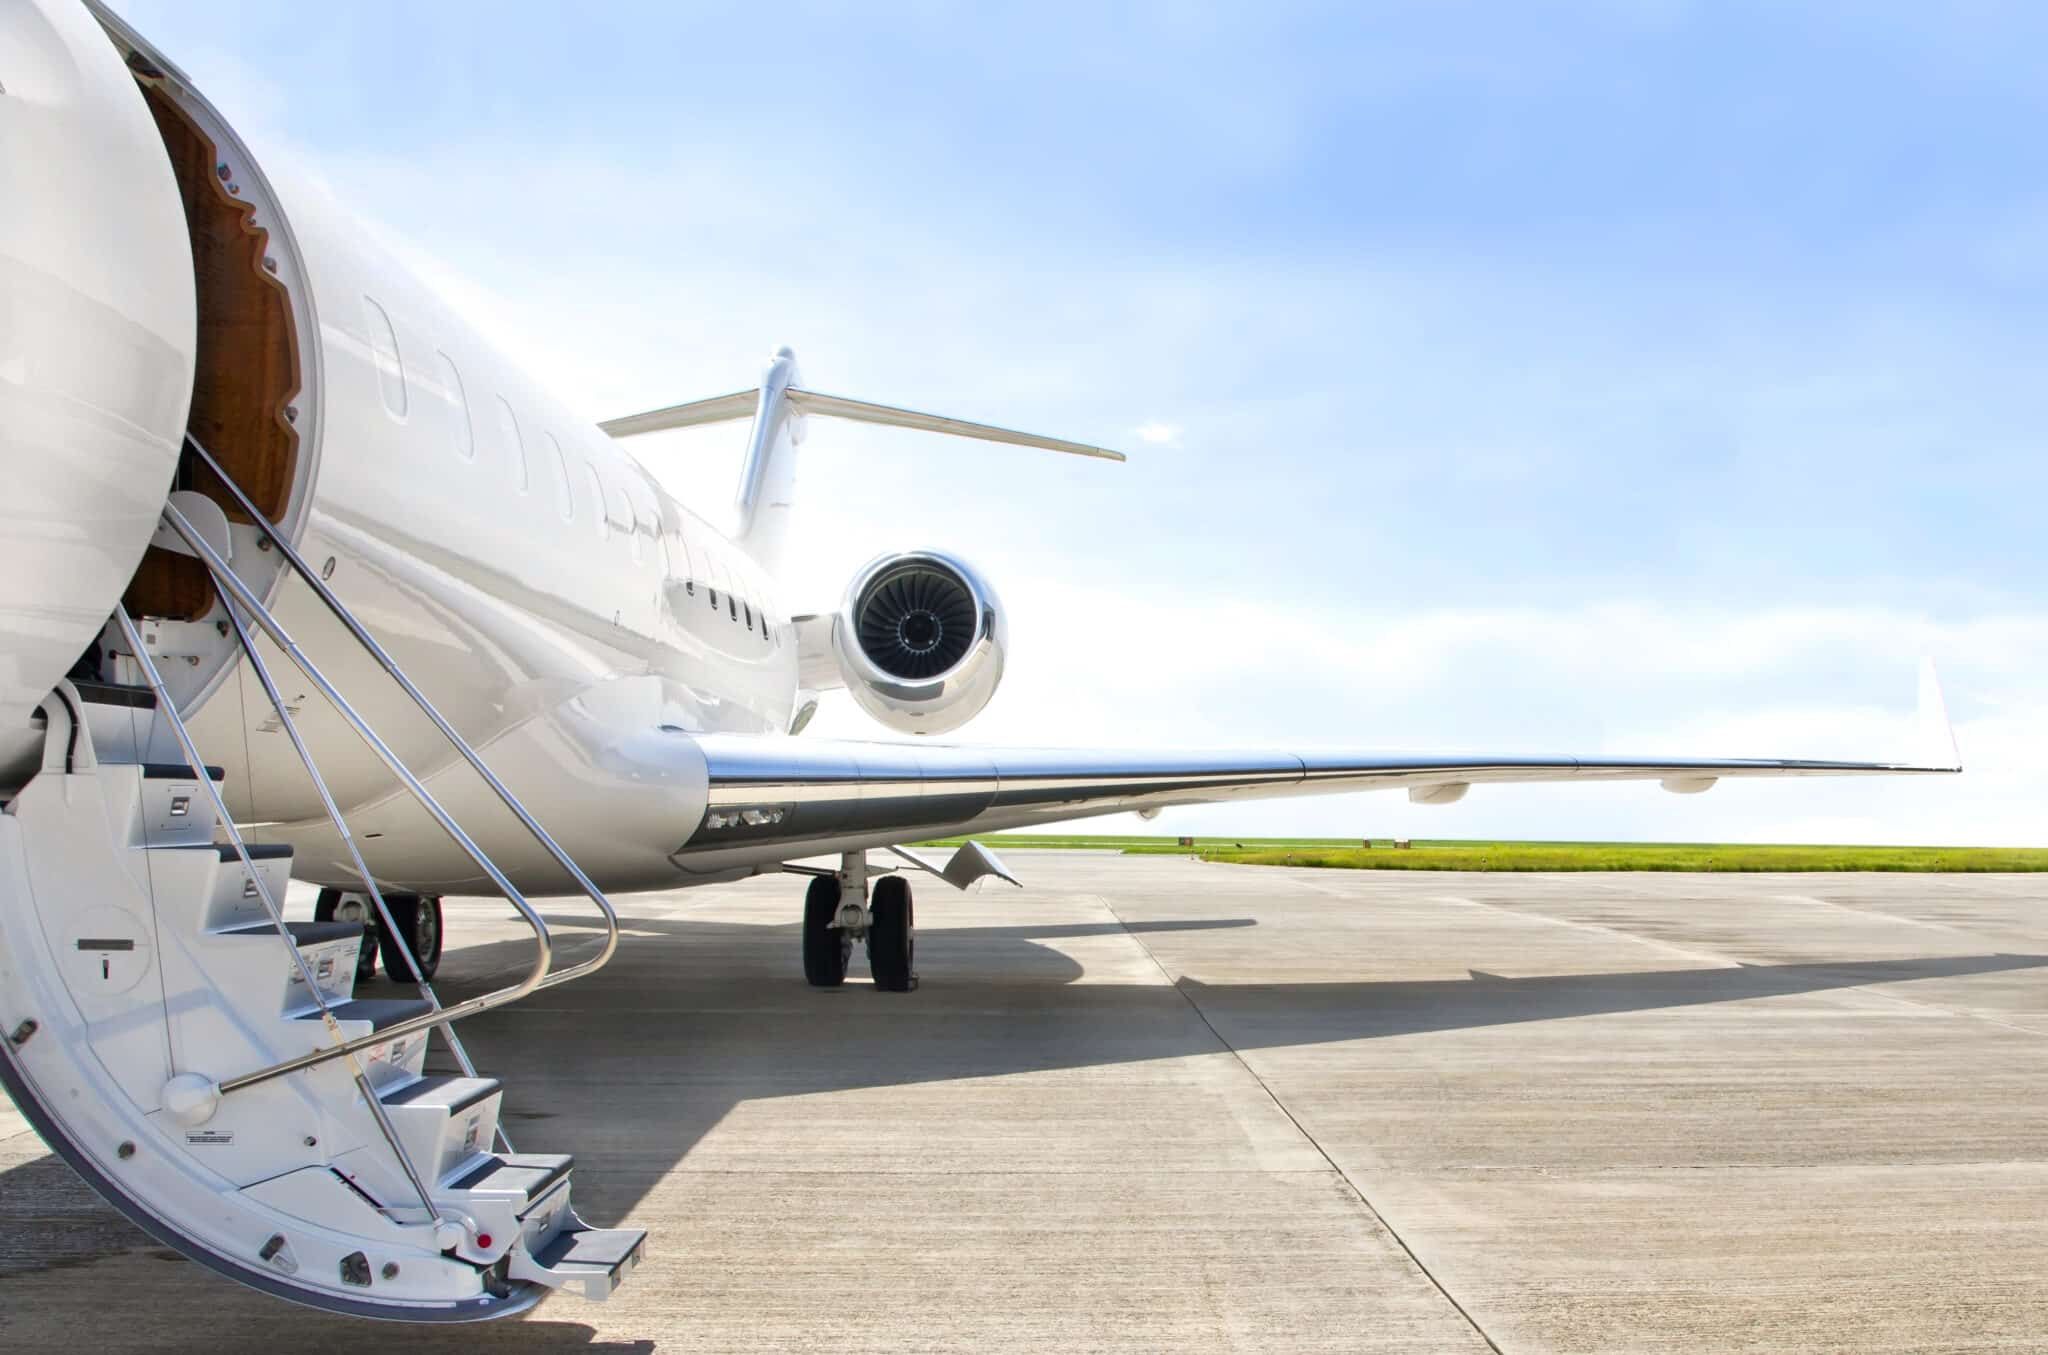 Rent a private jet for your vacations what are the advantages